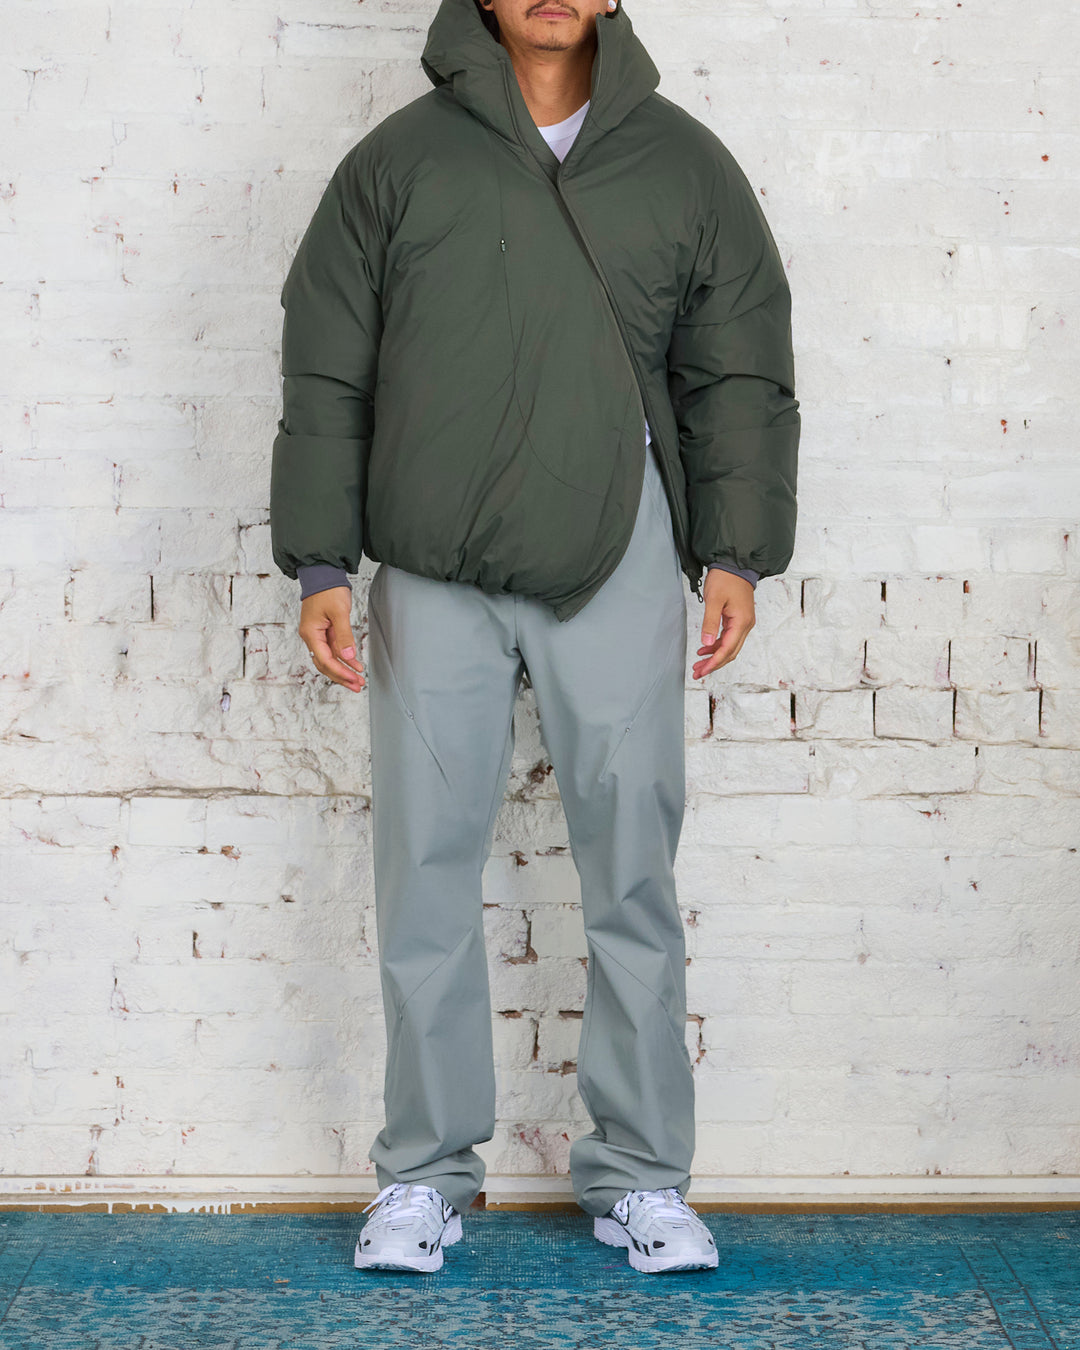 POST ARCHIVE FACTION (PAF) 5.1 Down Center Jacket Olive Green – LESS 17